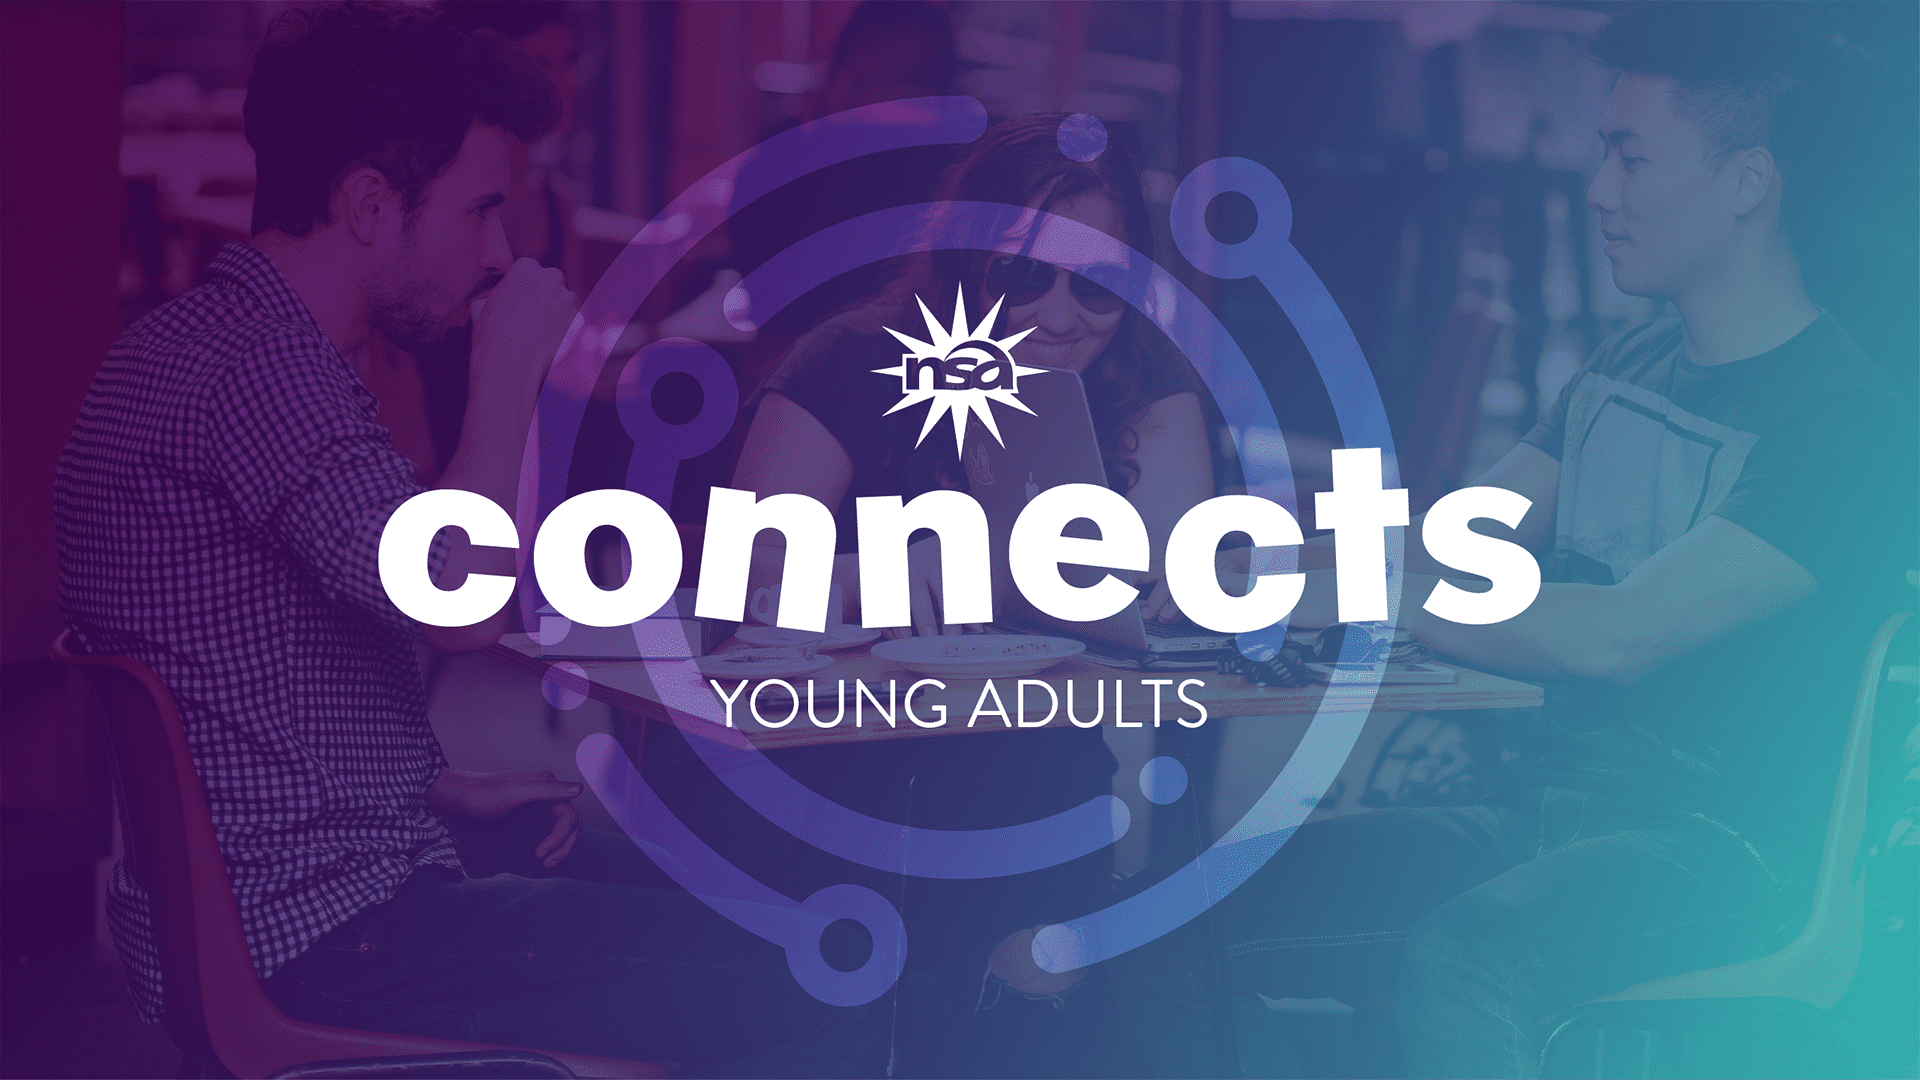 Three young adults are sitting at a table and engaging in a discussion. The background has a blue and purple gradient. Overlaid text reads "Connects Young Adults" with an NSA logo featuring a starburst design above.